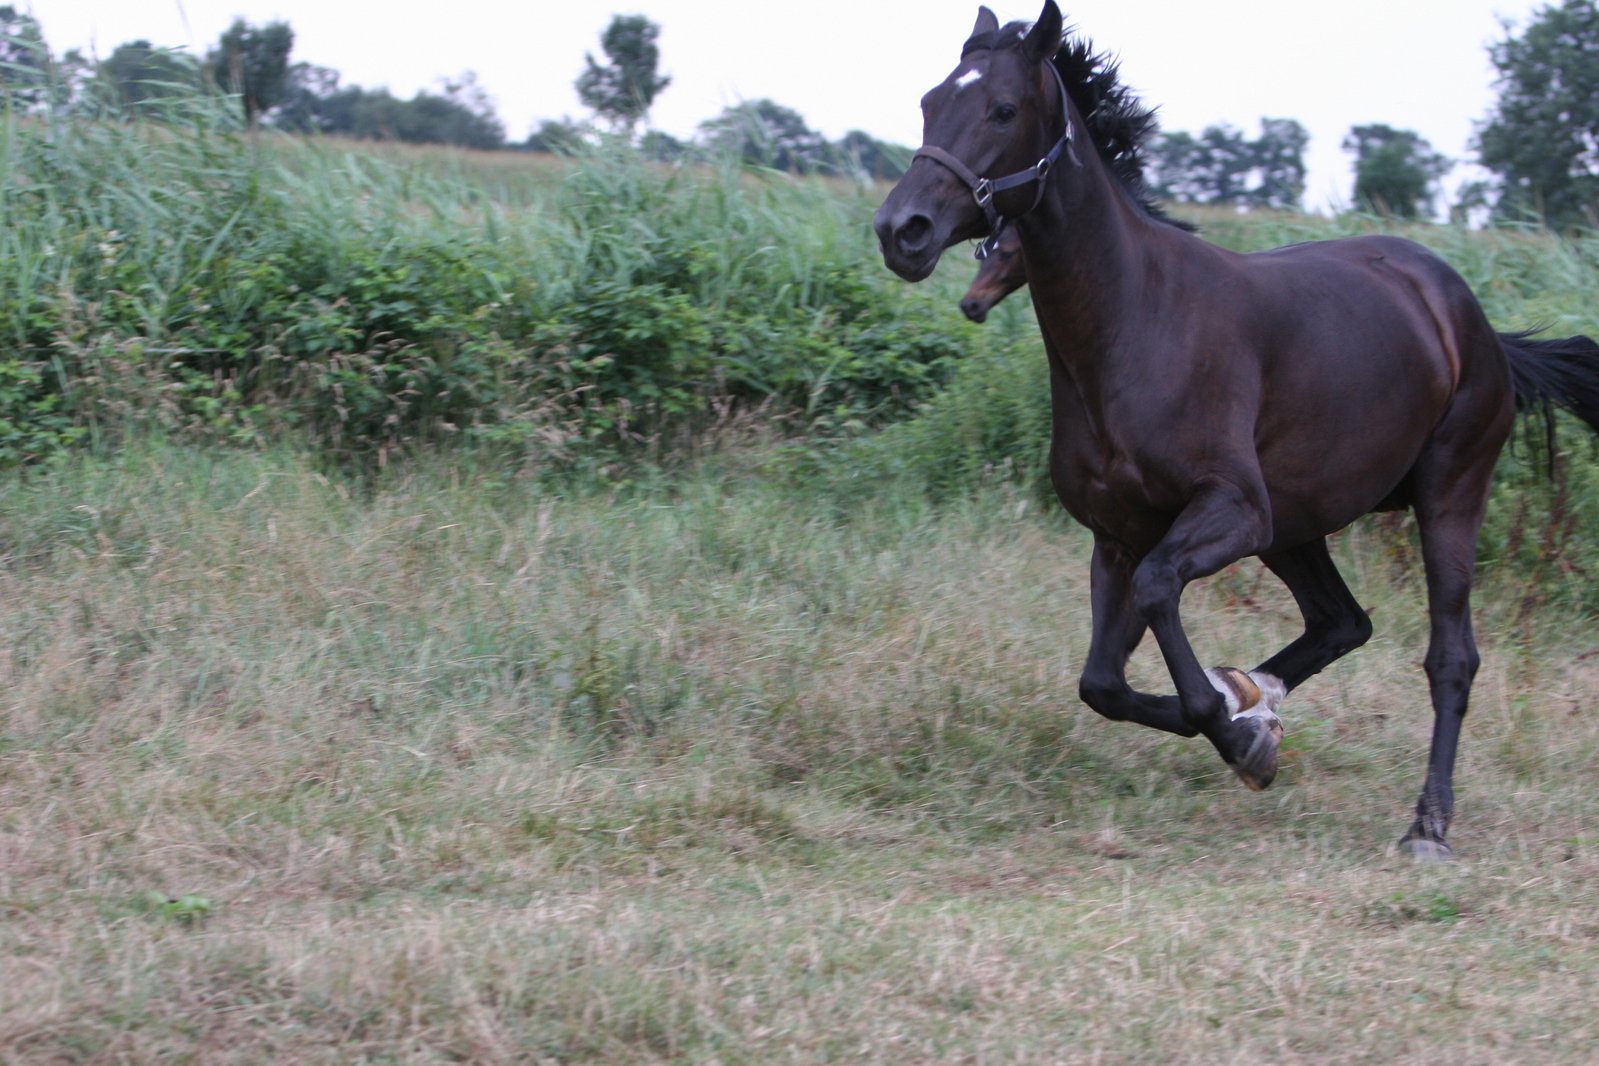 a horse running in a grassy field with weeds